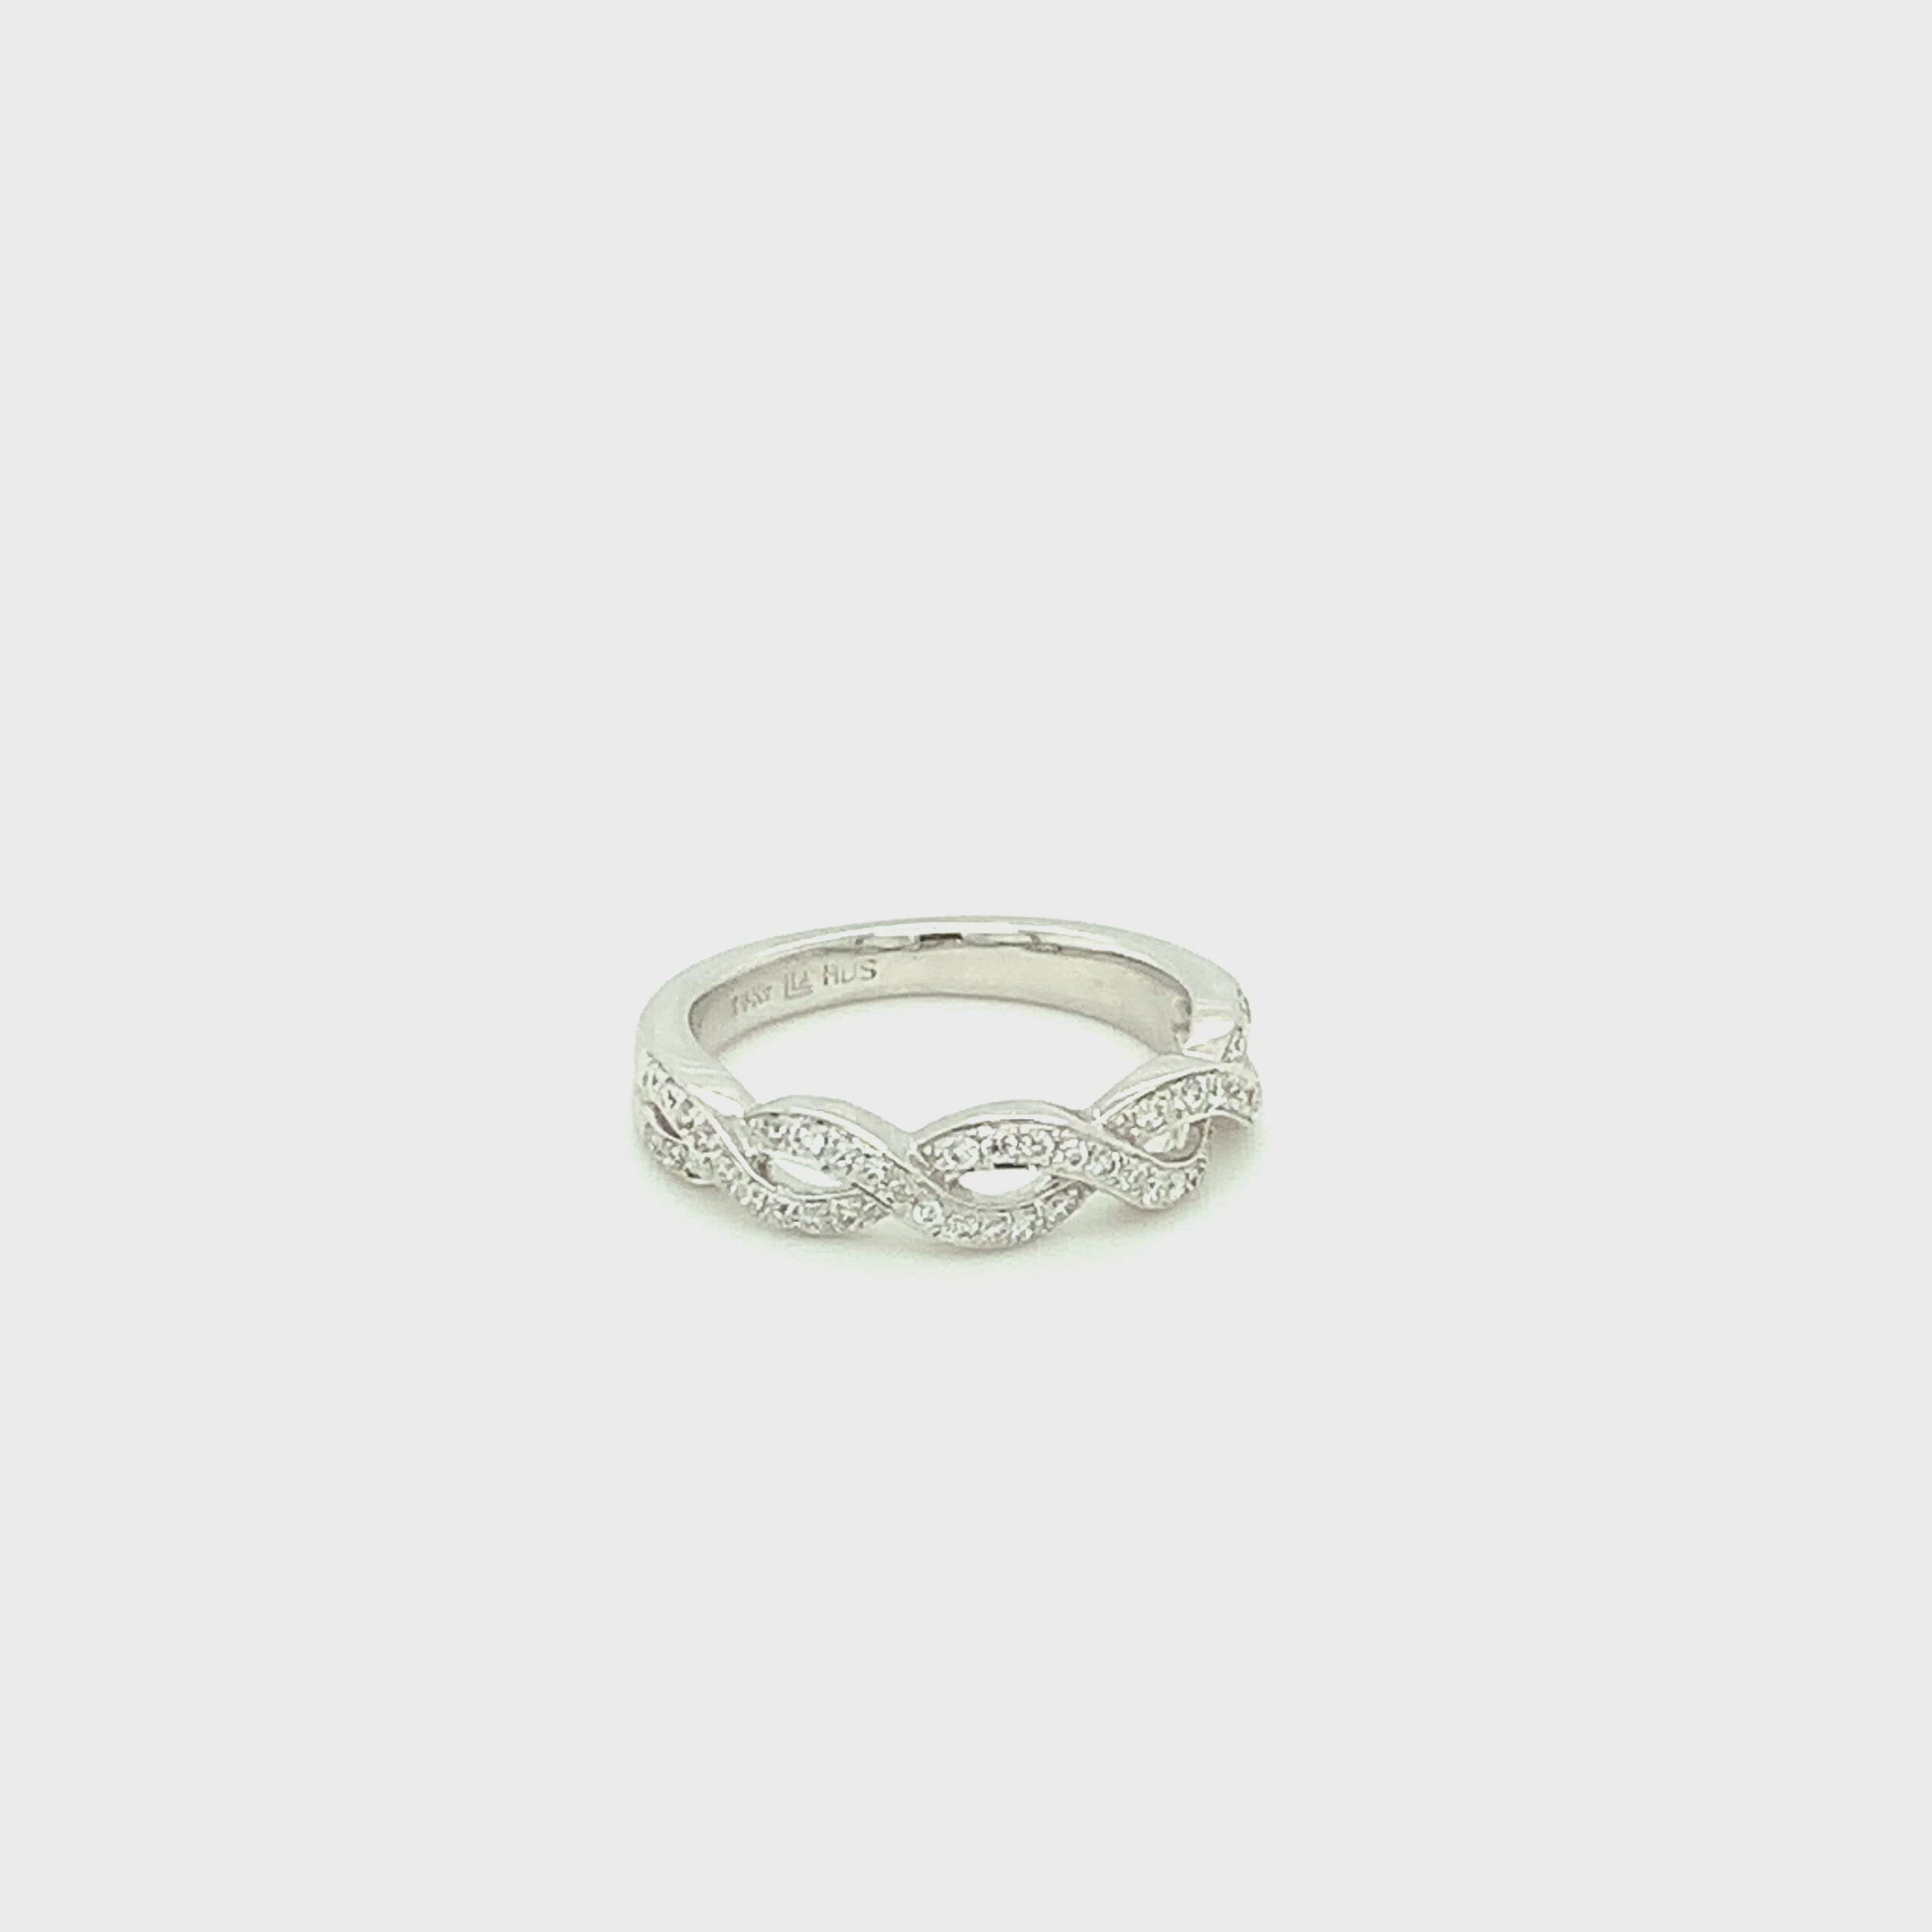 Natural Diamond Ring 14K Solid White Gold .44tcw Diamond Band Wedding Band Wedding Ring Anniversary Ring Bridal Jewelry Birthstone Ring